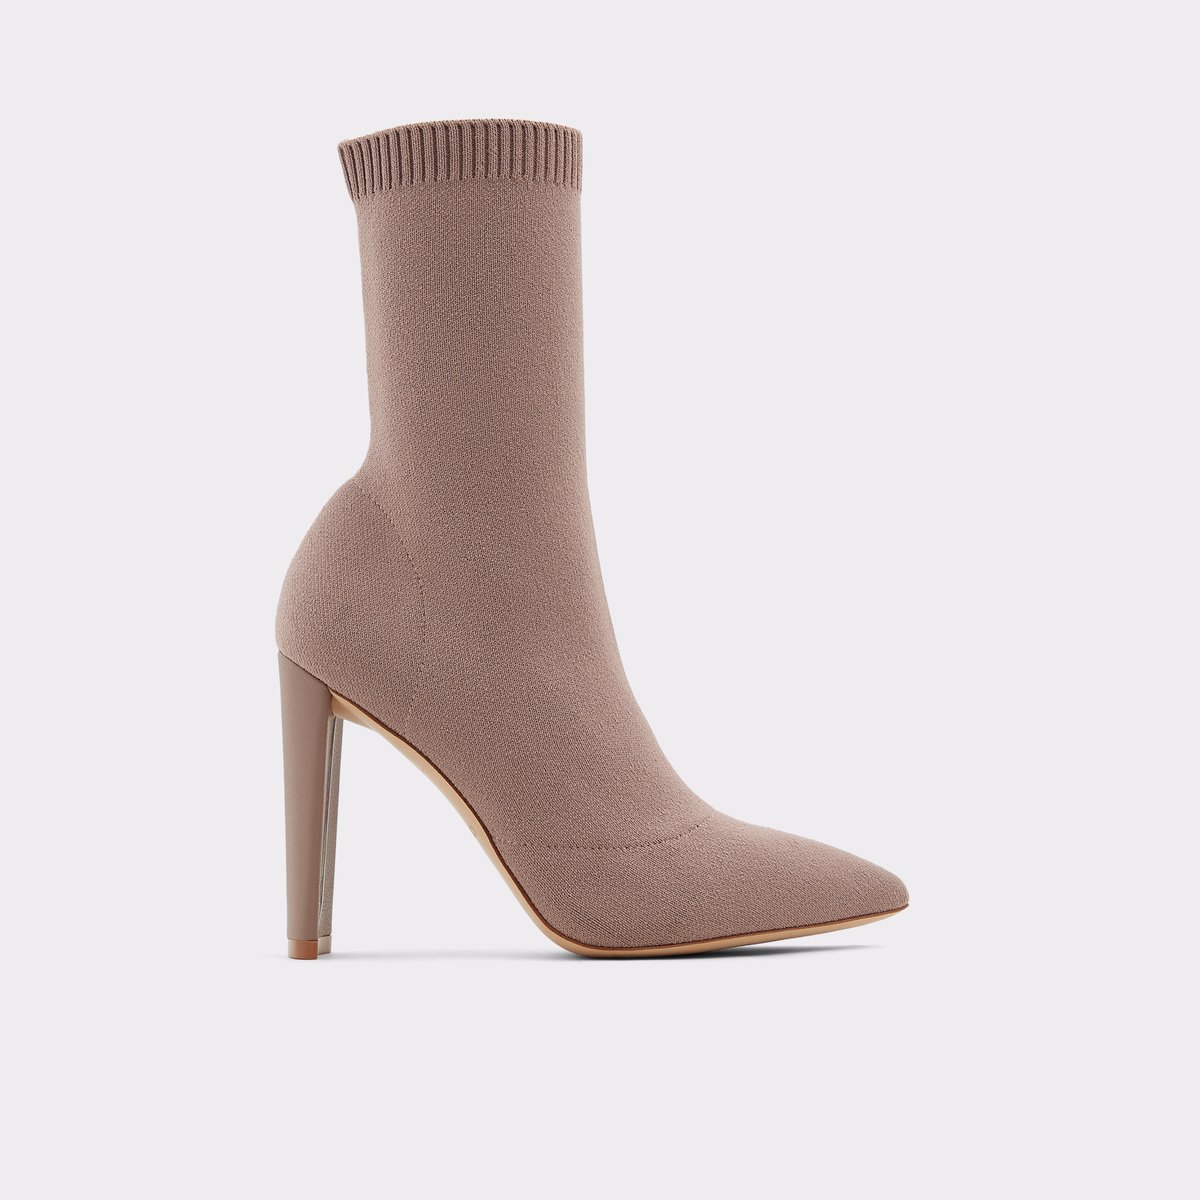 aldo grey ankle boots